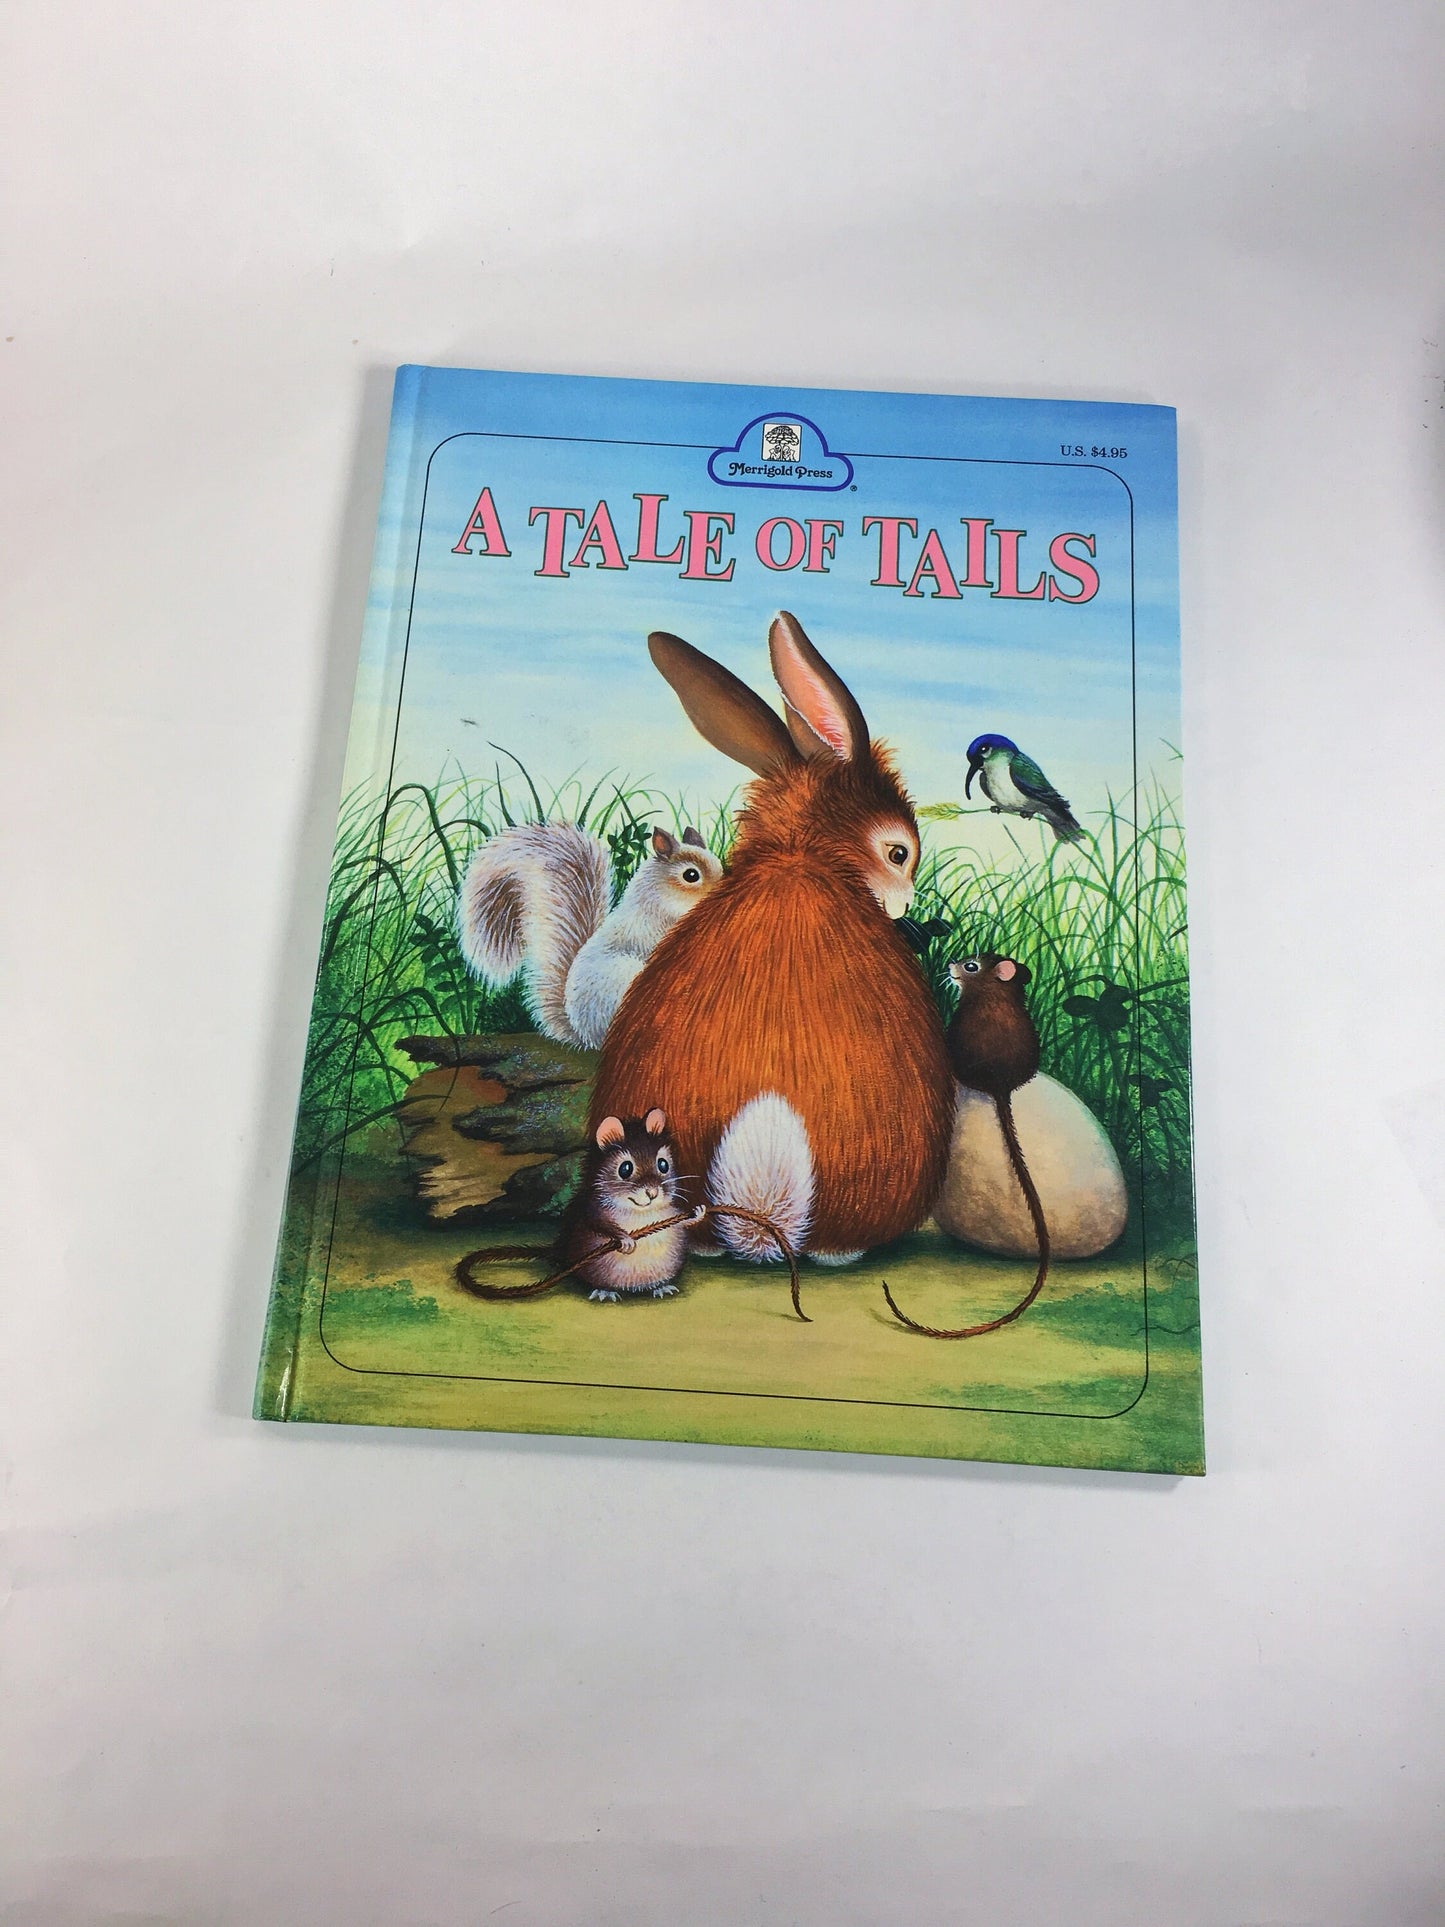 1962 Tale of Tails illustrated by Garth Williams. Vintage Easter Bunny book by Elizabeth Macpherson. Children's basket nursery decor